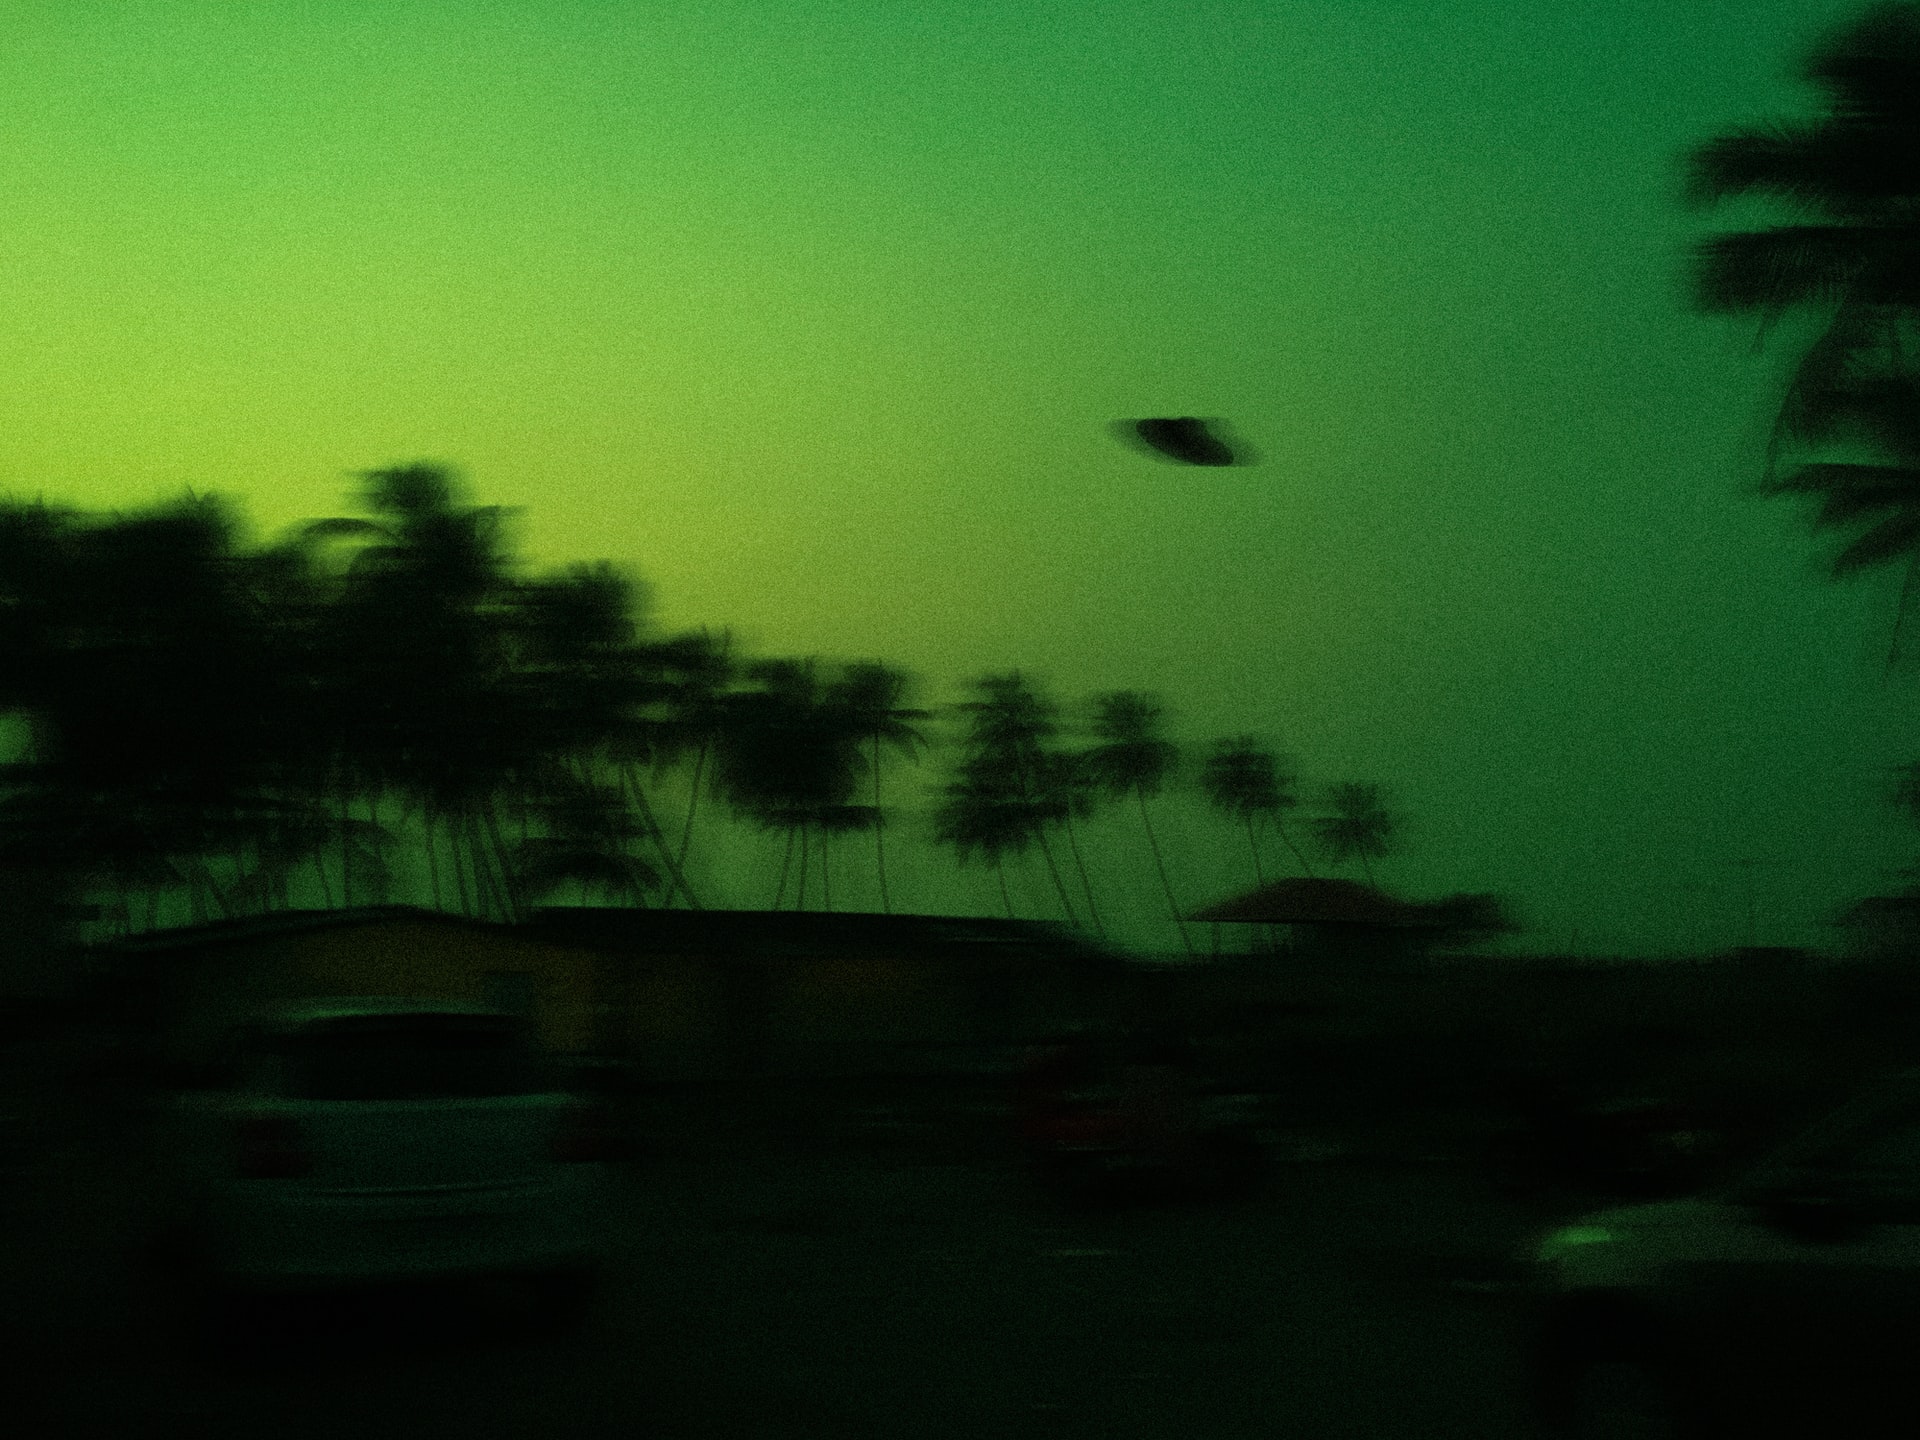 A flying saucer in a green sky